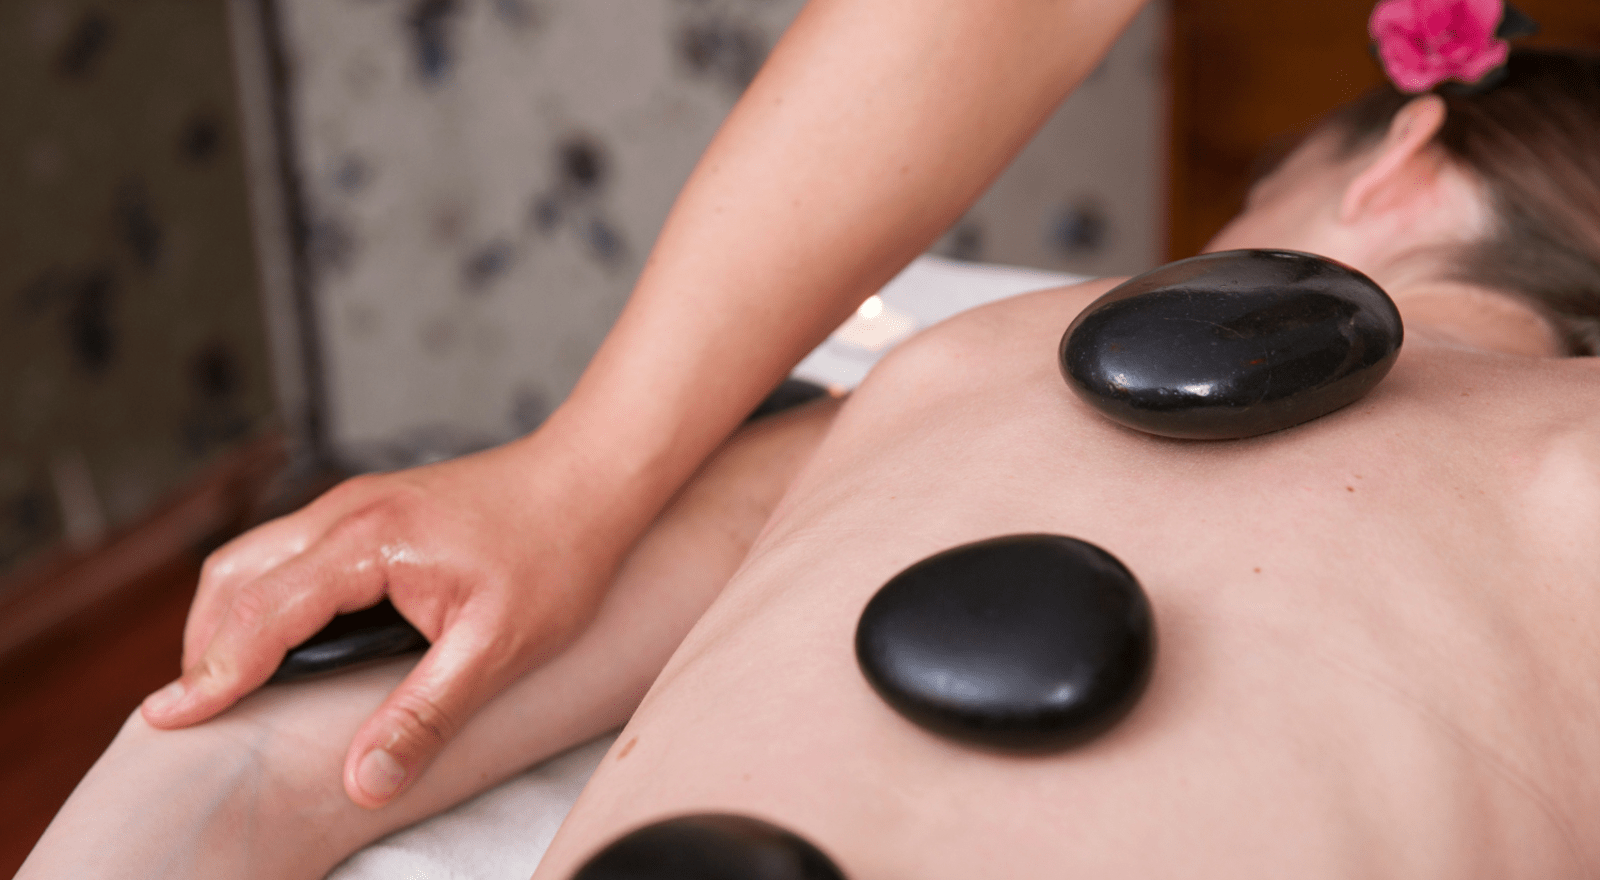 A woman lies face down with massage stones placed on her back